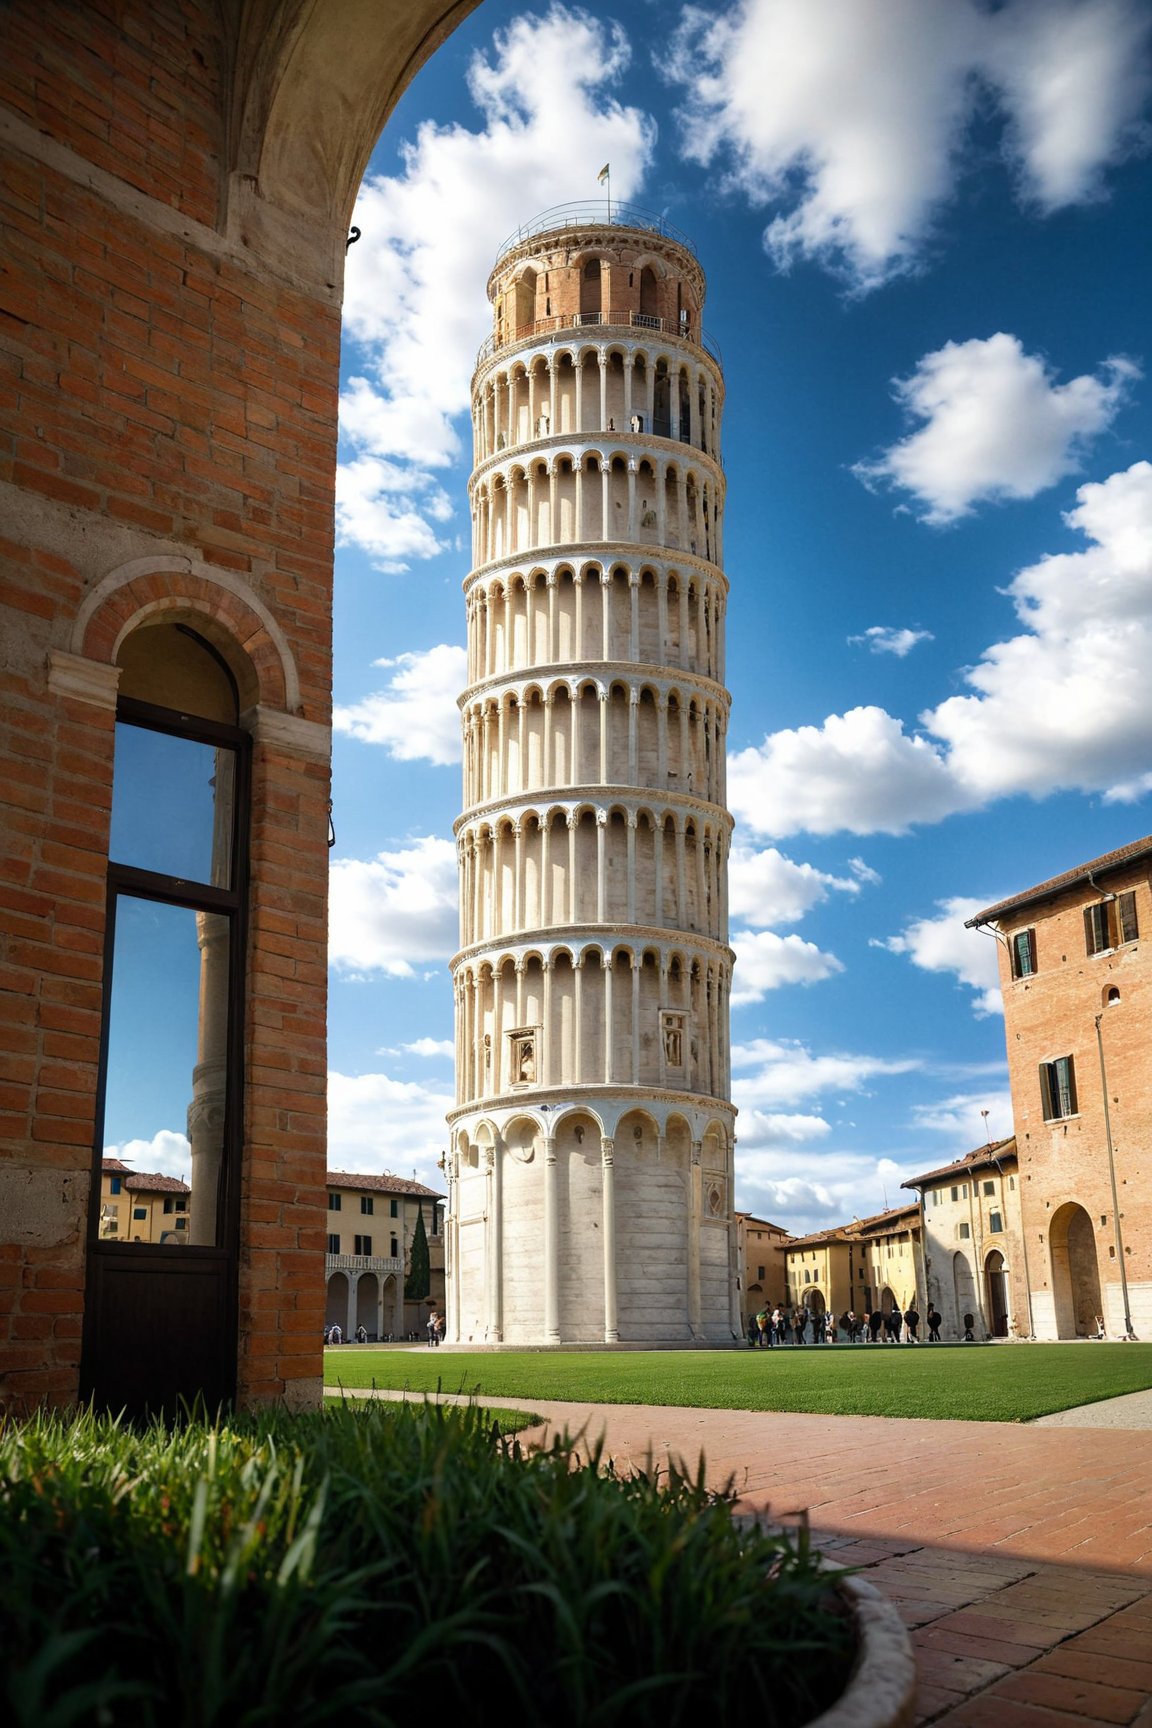 (Documentary photograph:1.3) of (The Leaning Tower of Pisa:1.4), 14th century, (golden ratio:1.3), (medieval architecture:1.3), (mullioned windows:1.3),(brick wall:1.1), (overlooking the Piazza dei Miracoli:1.4), beautiful blue sky with imposing cumulonembus clouds, grass meadow, BREAK shot on Canon EOS 5D, from below, Fujicolor Pro film, in the style of Miko Lagerstedt/Liam Wong/Nan Goldin/Lee Friedlander, (photorealistic:1.3), (soft diffused lighting:1.2), vignette, highest quality, original shot. BREAK Front view, well-lit, (perfect focus:1.2), award winning, detailed and intricate, masterpiece, itacstl,real_booster,itacstl